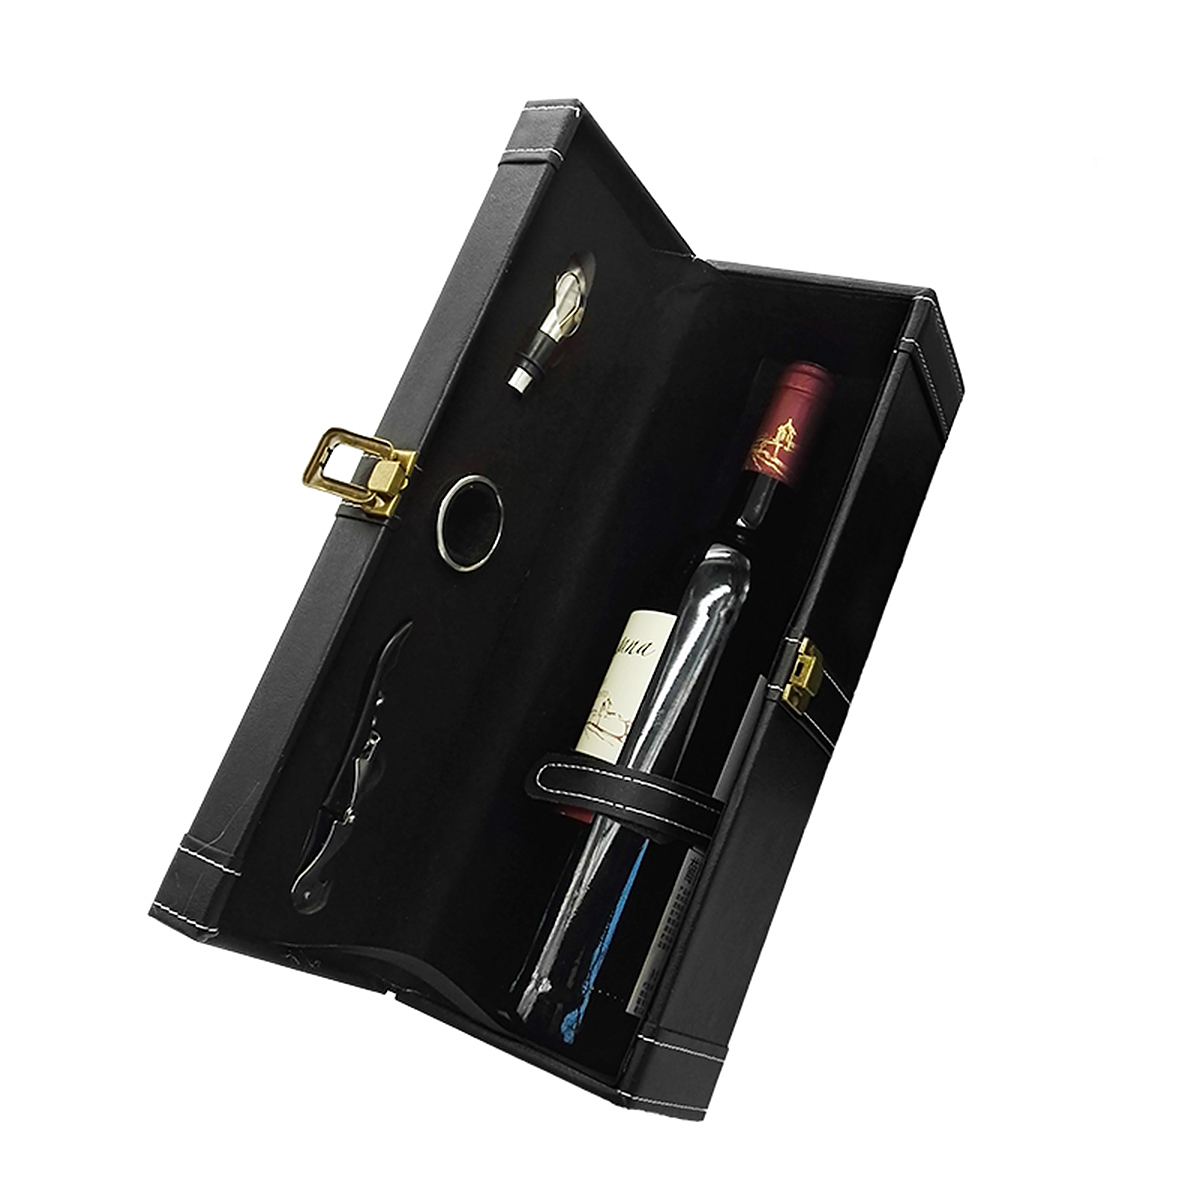 1 Bottle Modern Black Top Handle Travel Wine Carrier Case with Wine Accessory Set